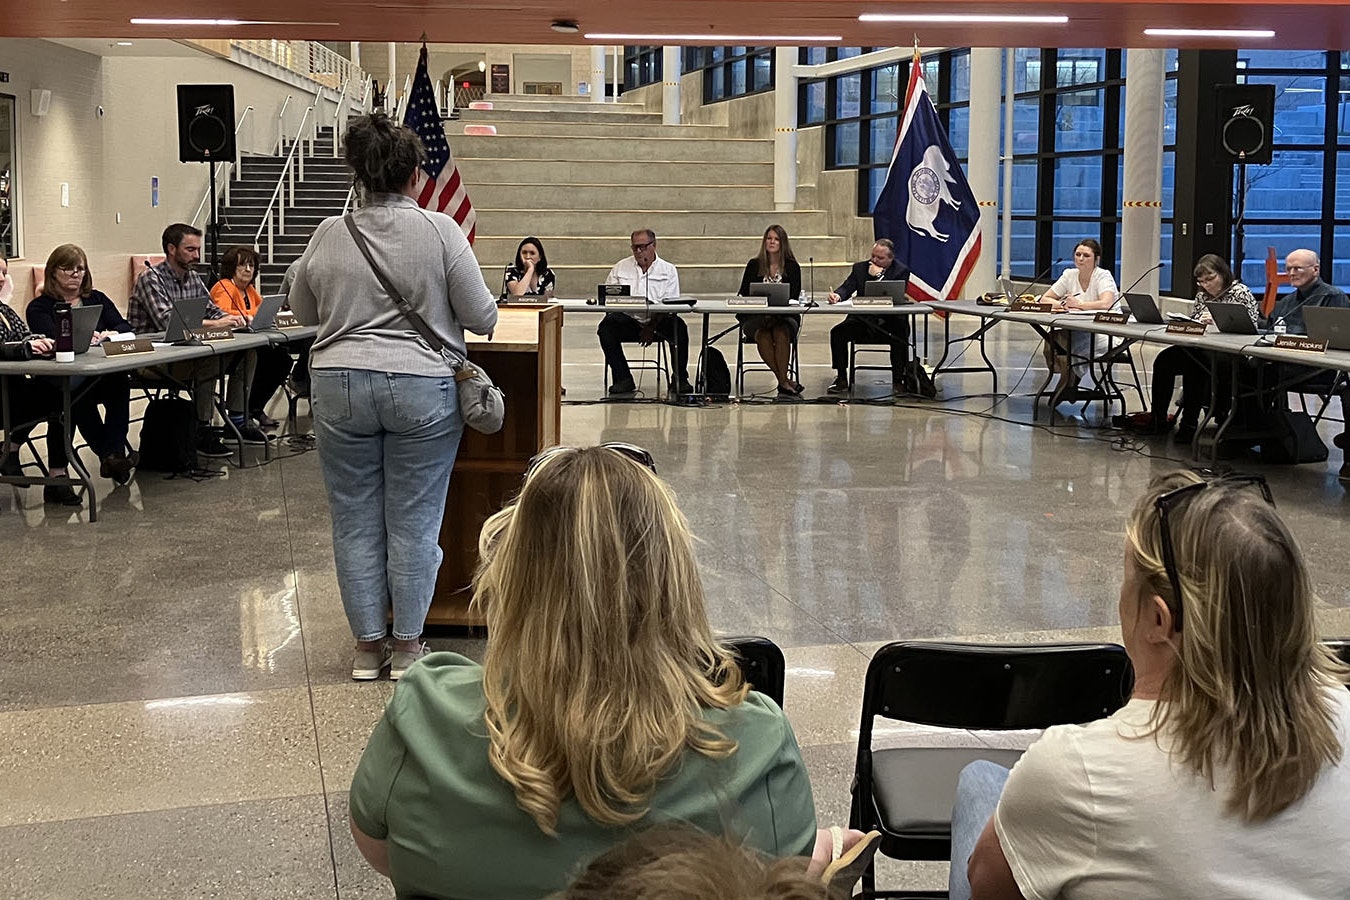 The Natrona County Board of Education heard from nearly a dozen parents and concerned citizens about the culture of violence and bullying that exists in the school district on Monday.